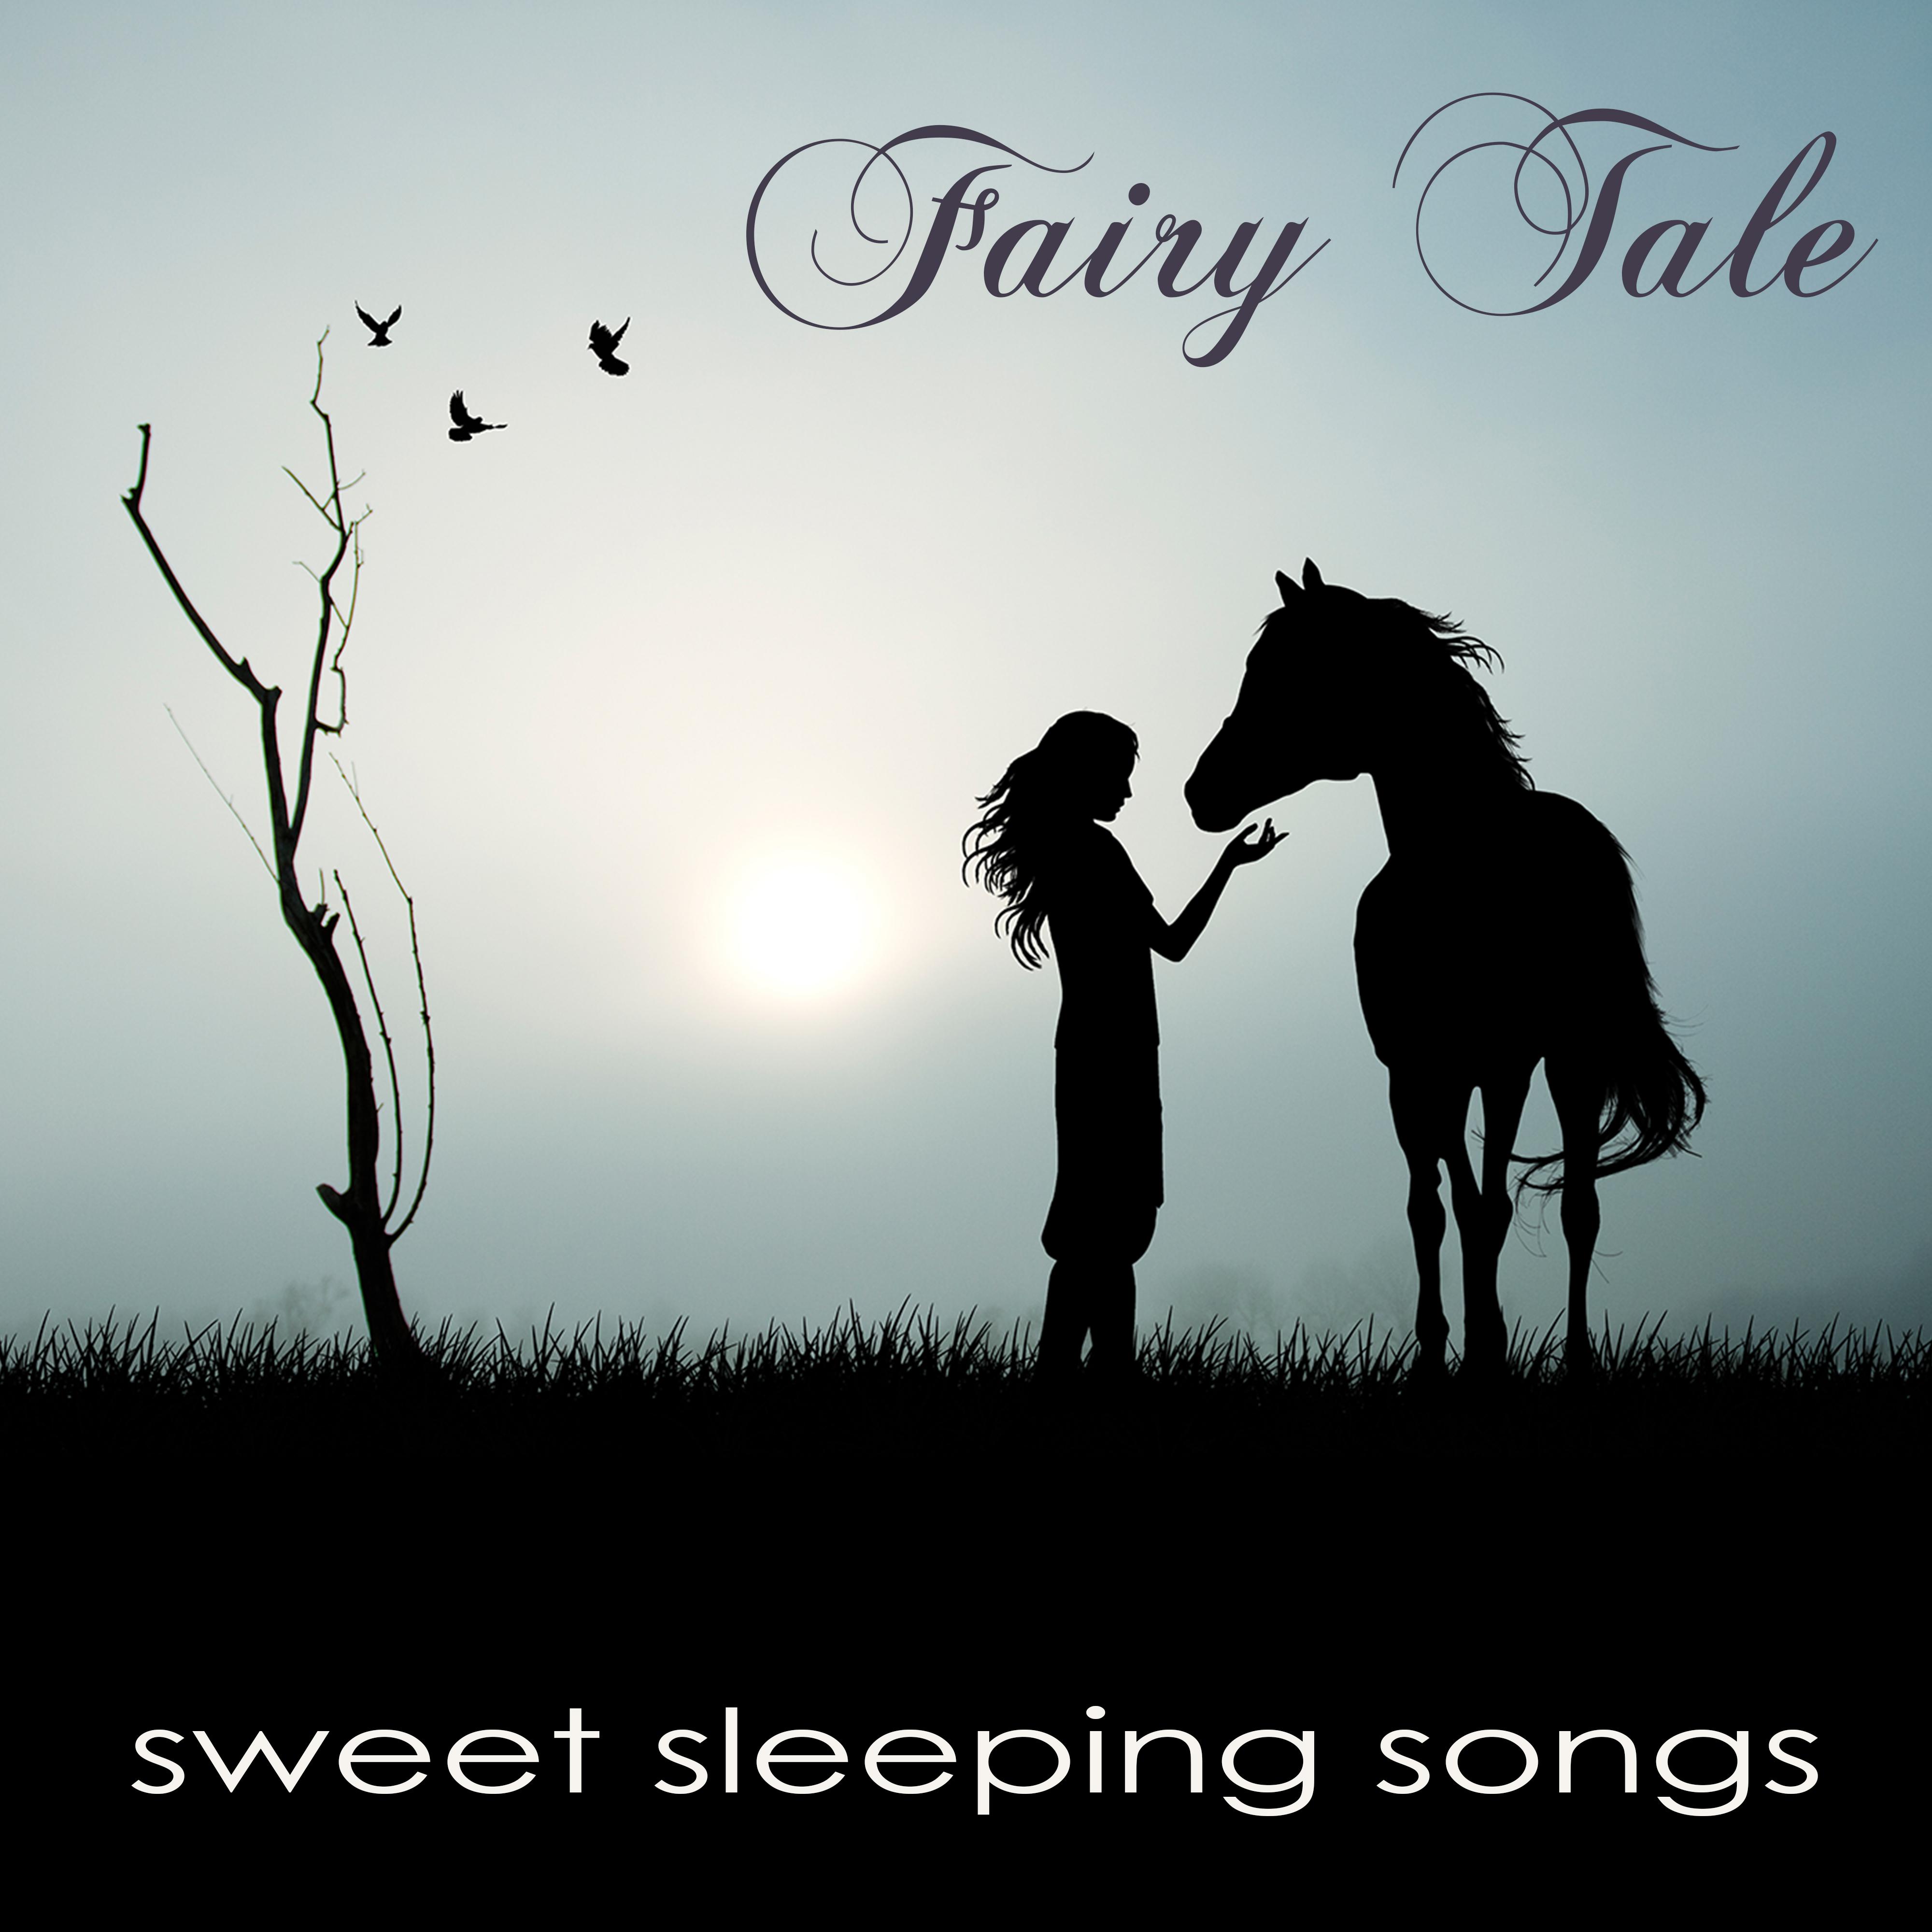 Fairy Tale Sweet Sleeping Songs  Soft Backgroung Music, Baby Lullabies Napping Water Sounds for a Good Night Sleep  Resting